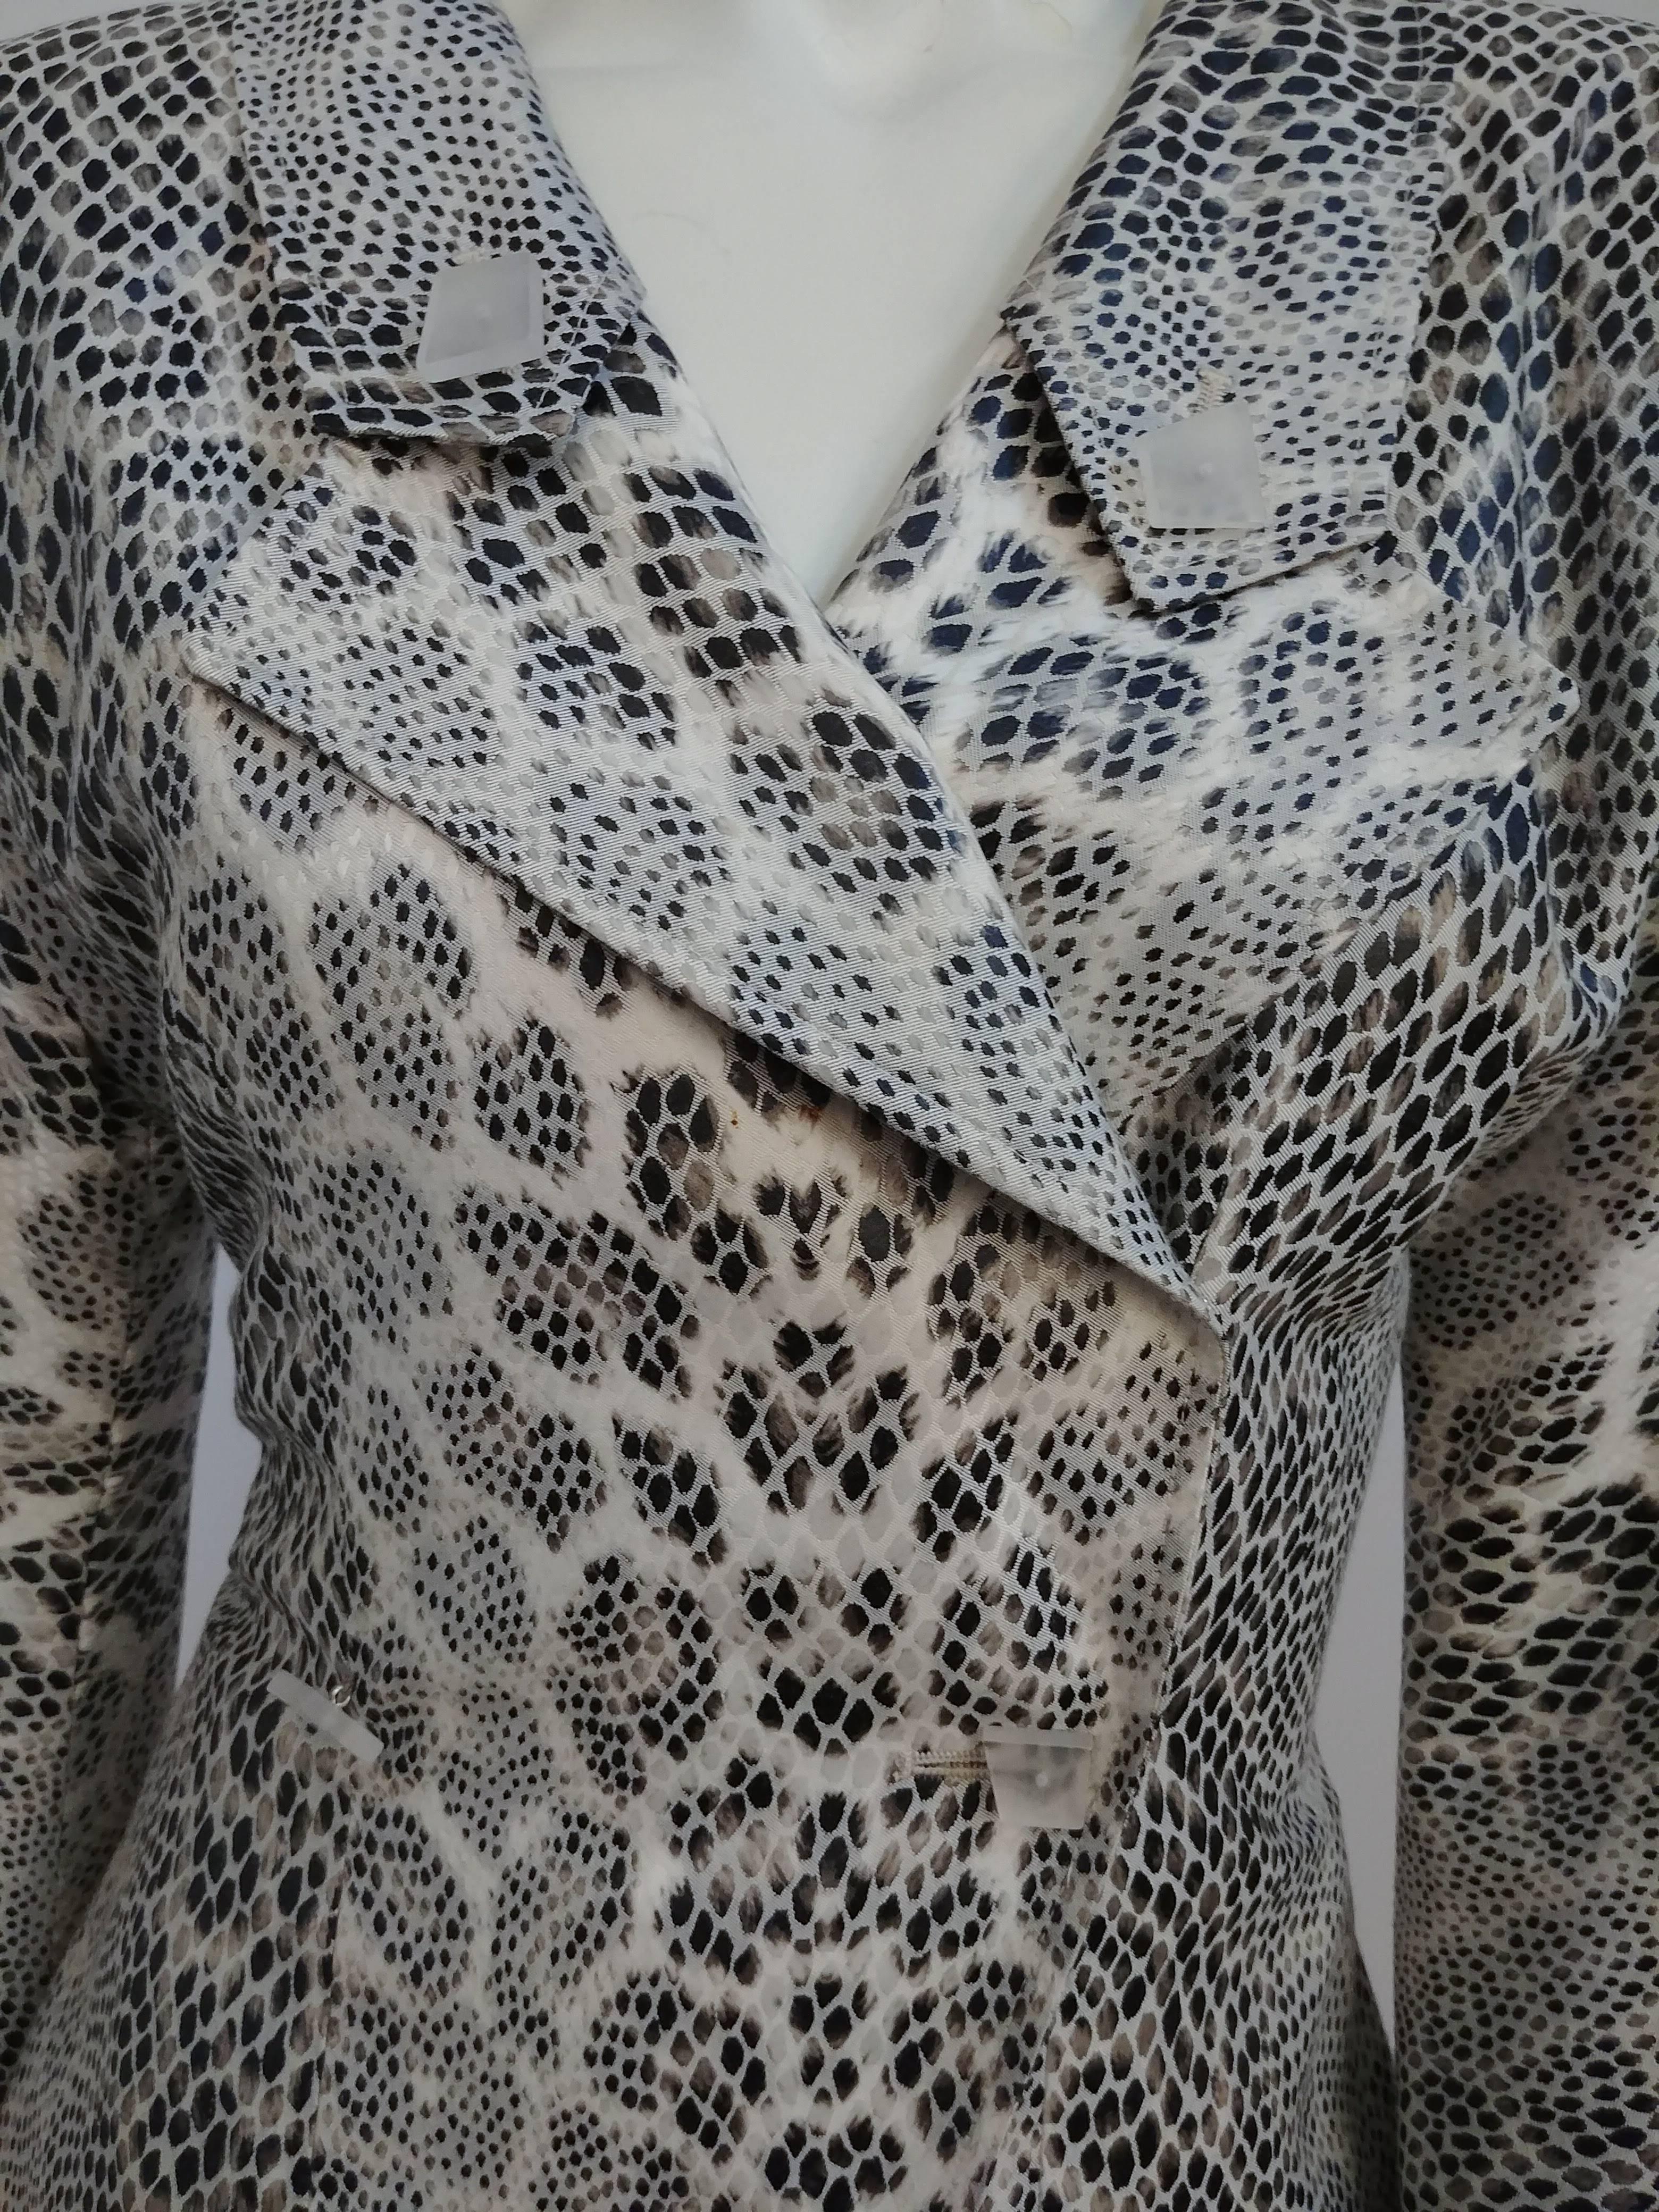 1980s Jean Muir White Snake Print Skirt Suit Set. Double breasted blazer jacket, frosted acrylic geometric buttons. Padded shoulders, wide lapels. 